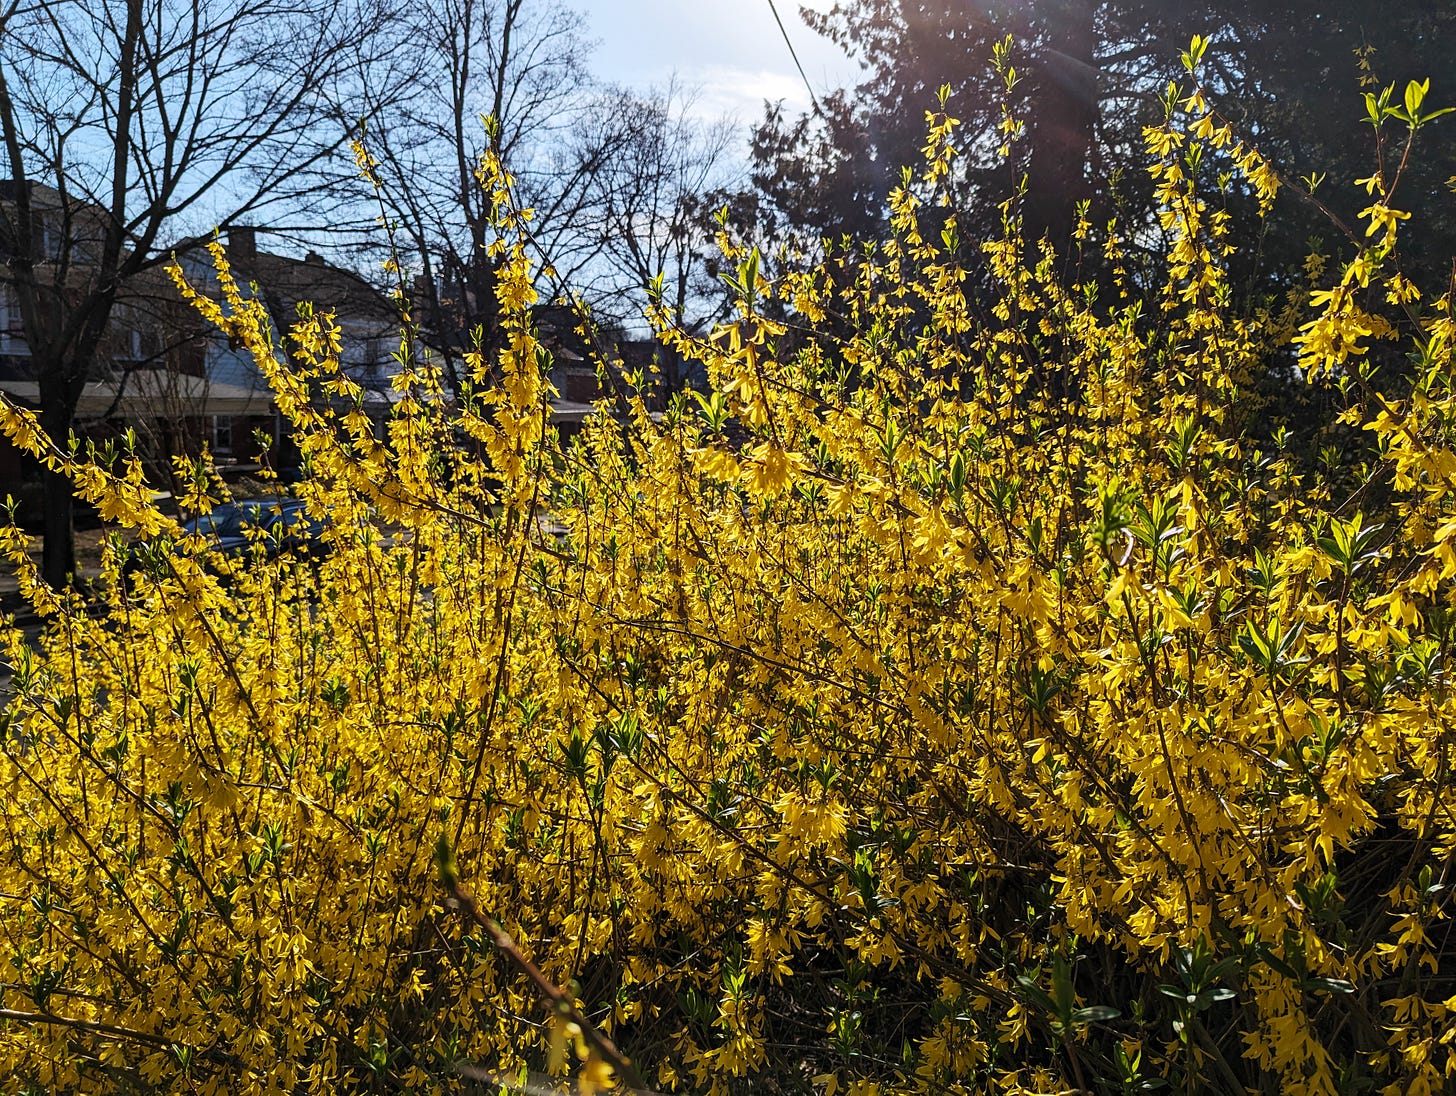 A forsythia bush blooms with bright yellow, downward-facing blossoms.